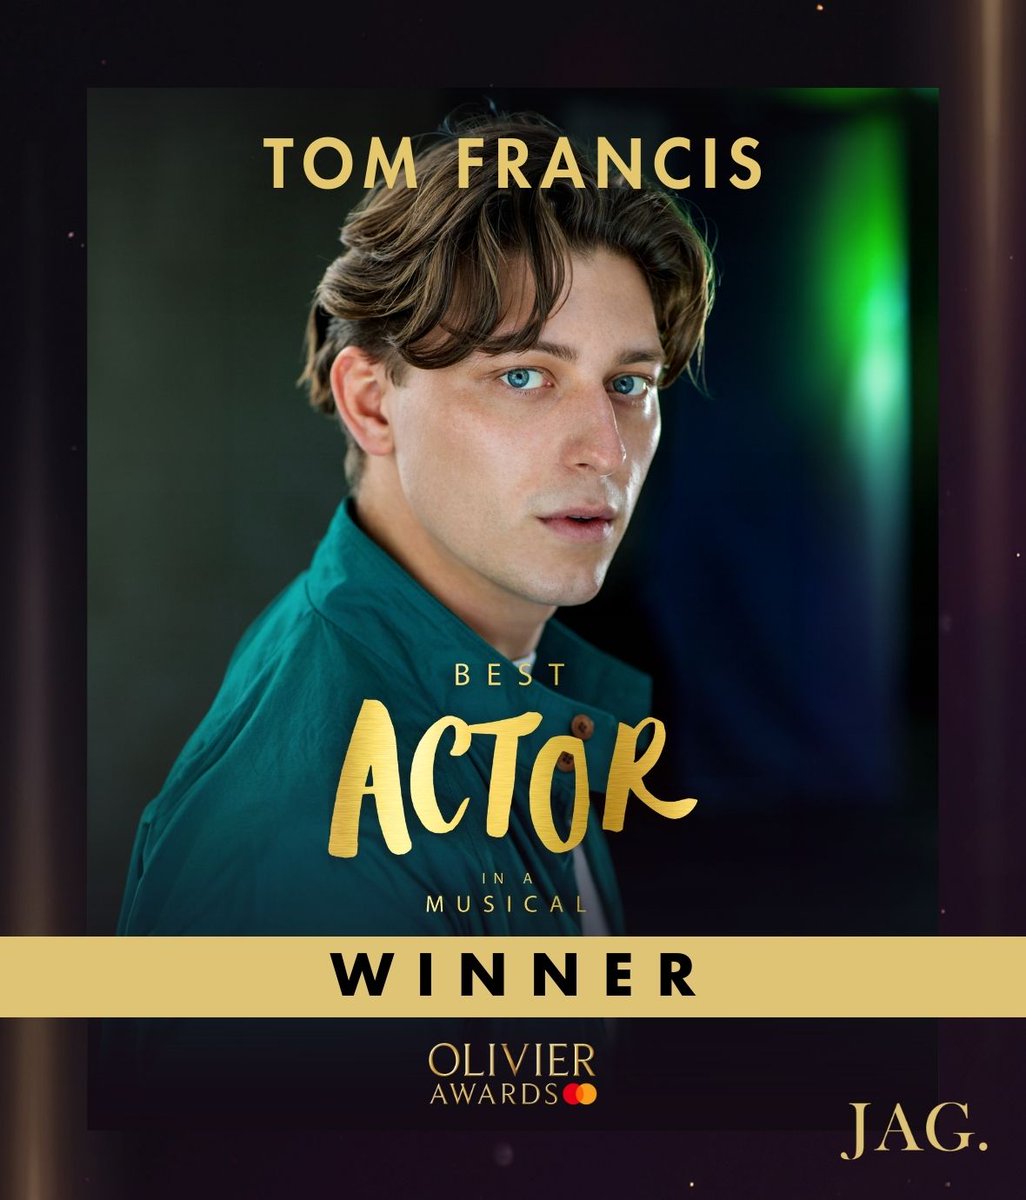 TOM FRANCIS (@realtomfrancis) wins the Olivier Award! Tom wins the award for BEST ACTOR IN A MUSICAL for playing the role of Joe in Sunset Boulevard. Casting by Stuart Burt. #tomfrancis #actor #stuartburtcasting @sunsetblvd